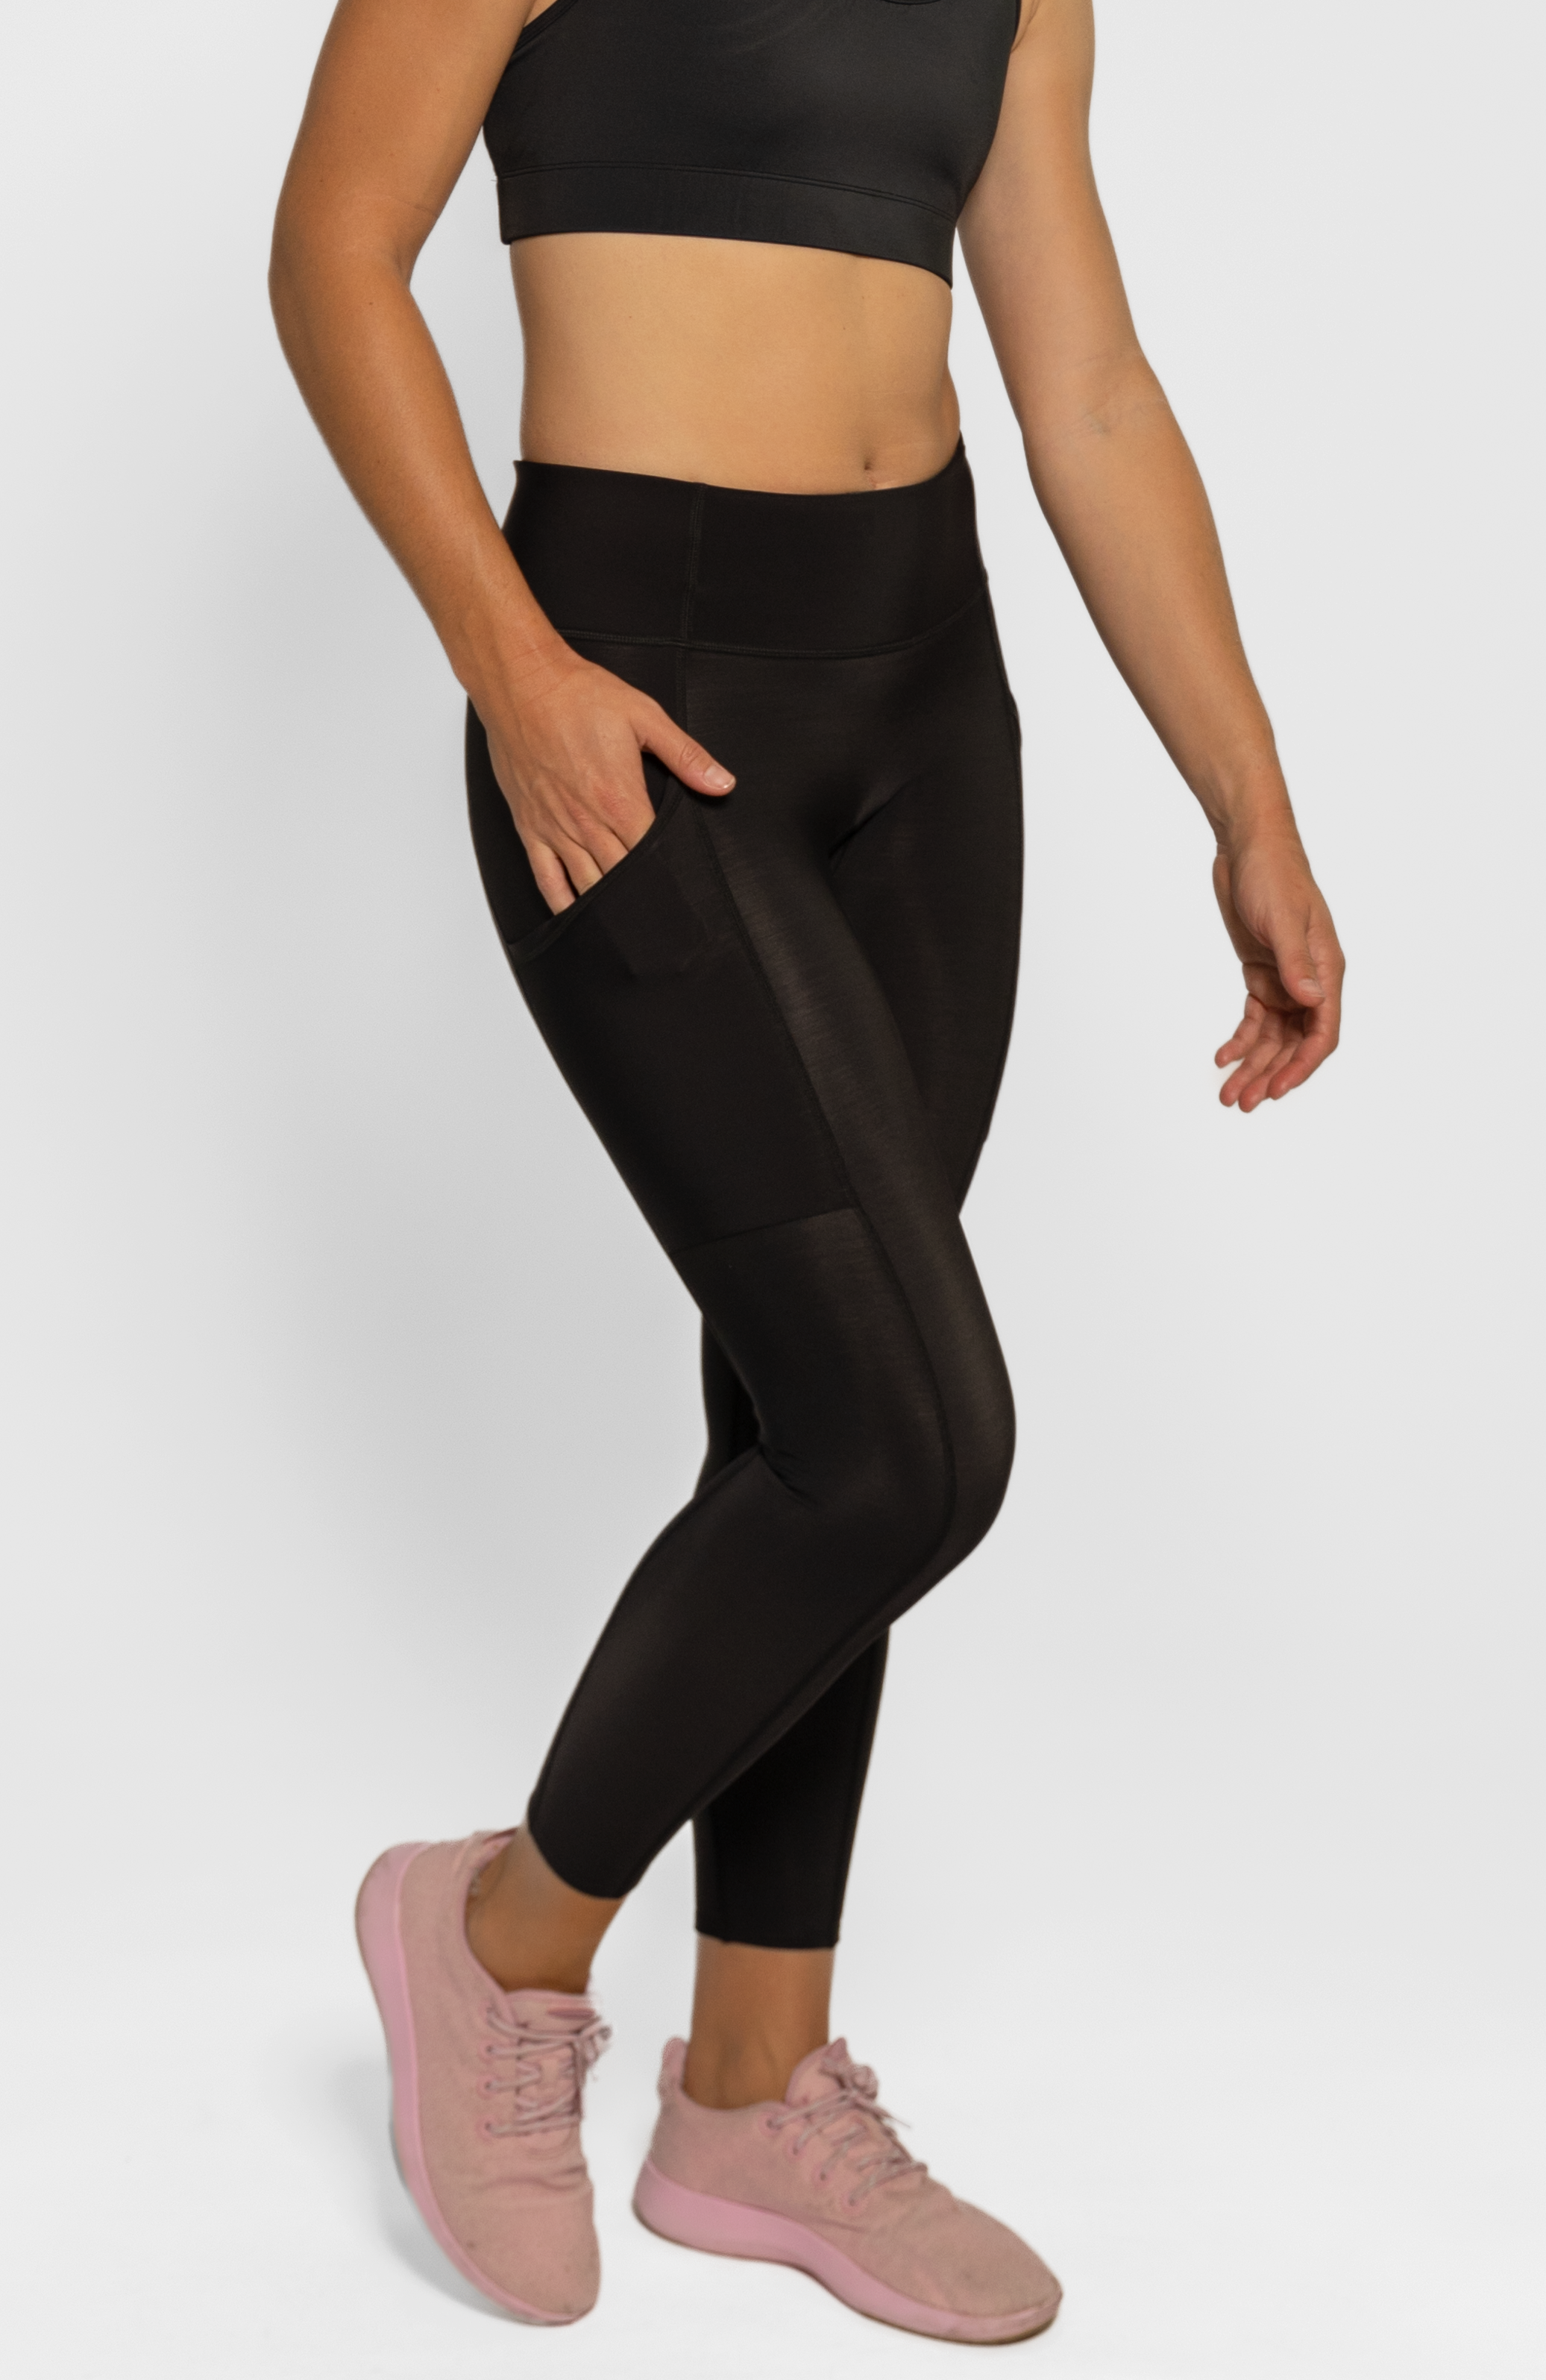 Momentum DriLayer Thermal Running Tight  Running tights, Running tights  women, Black running tights